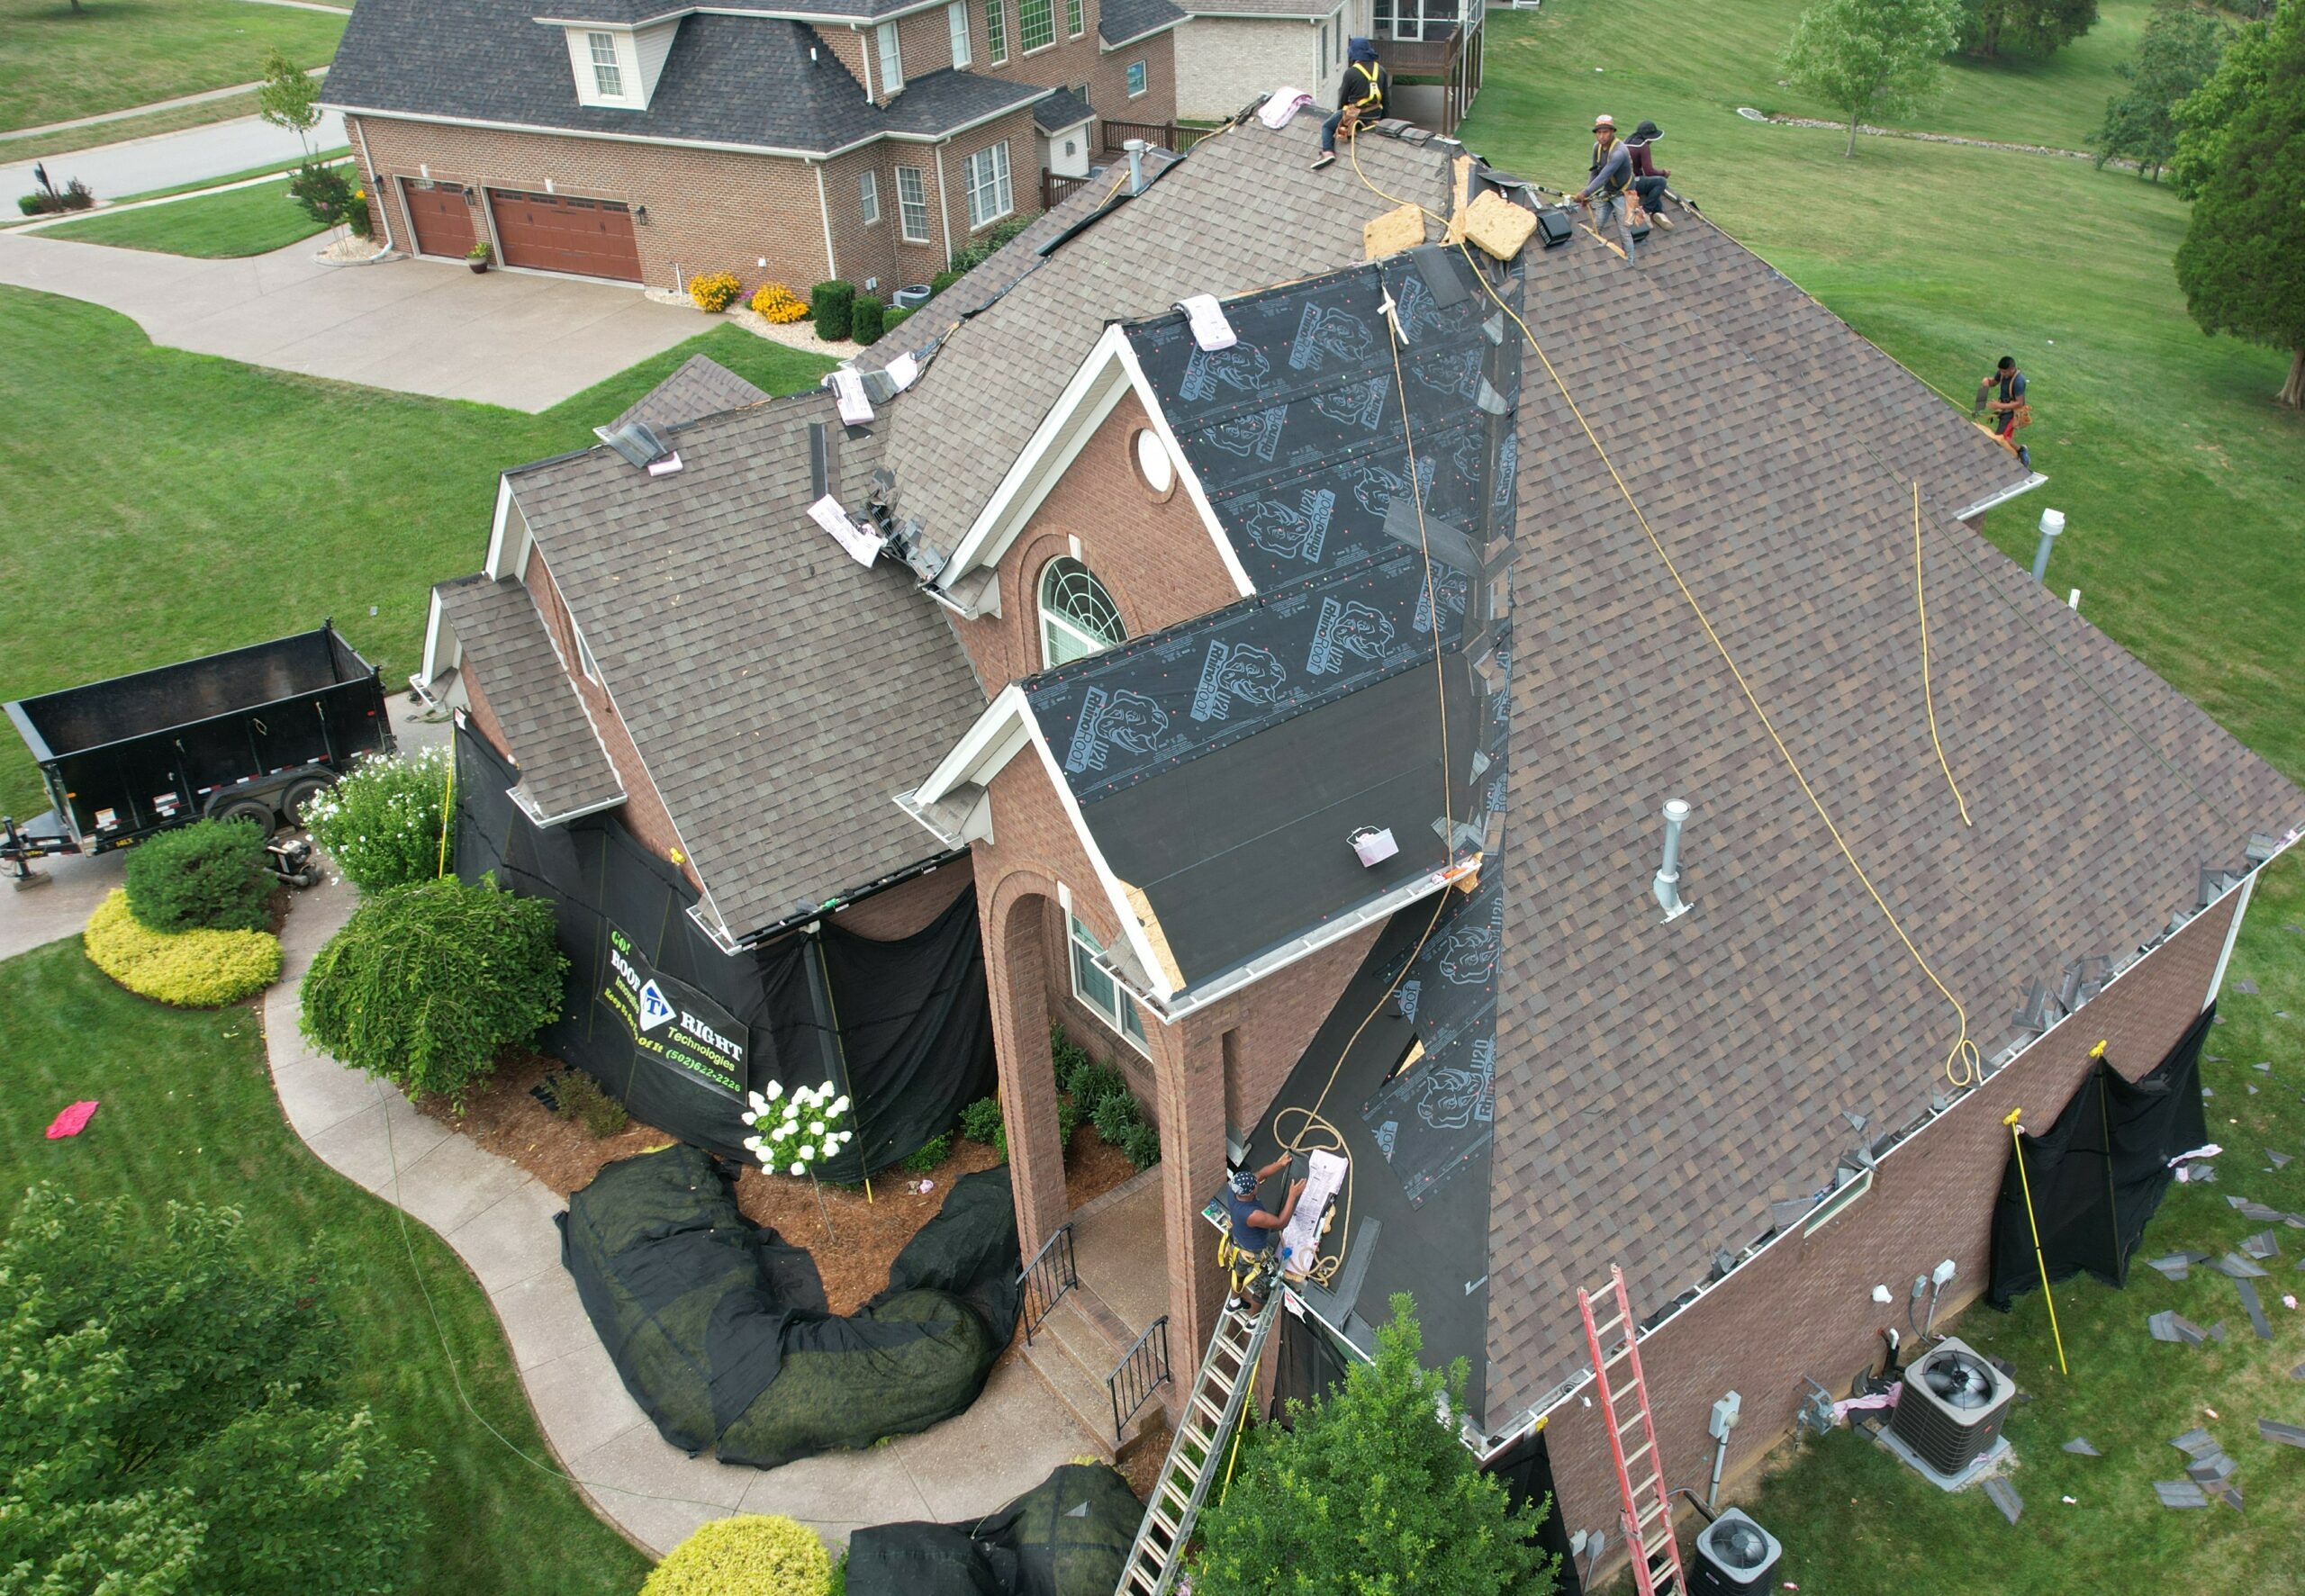 Doing it right requires strictly adhering to OSHA safety standards. These installers are safely tied to the roof with ropes and harnesses per OSHA standards for a roof with this slope.